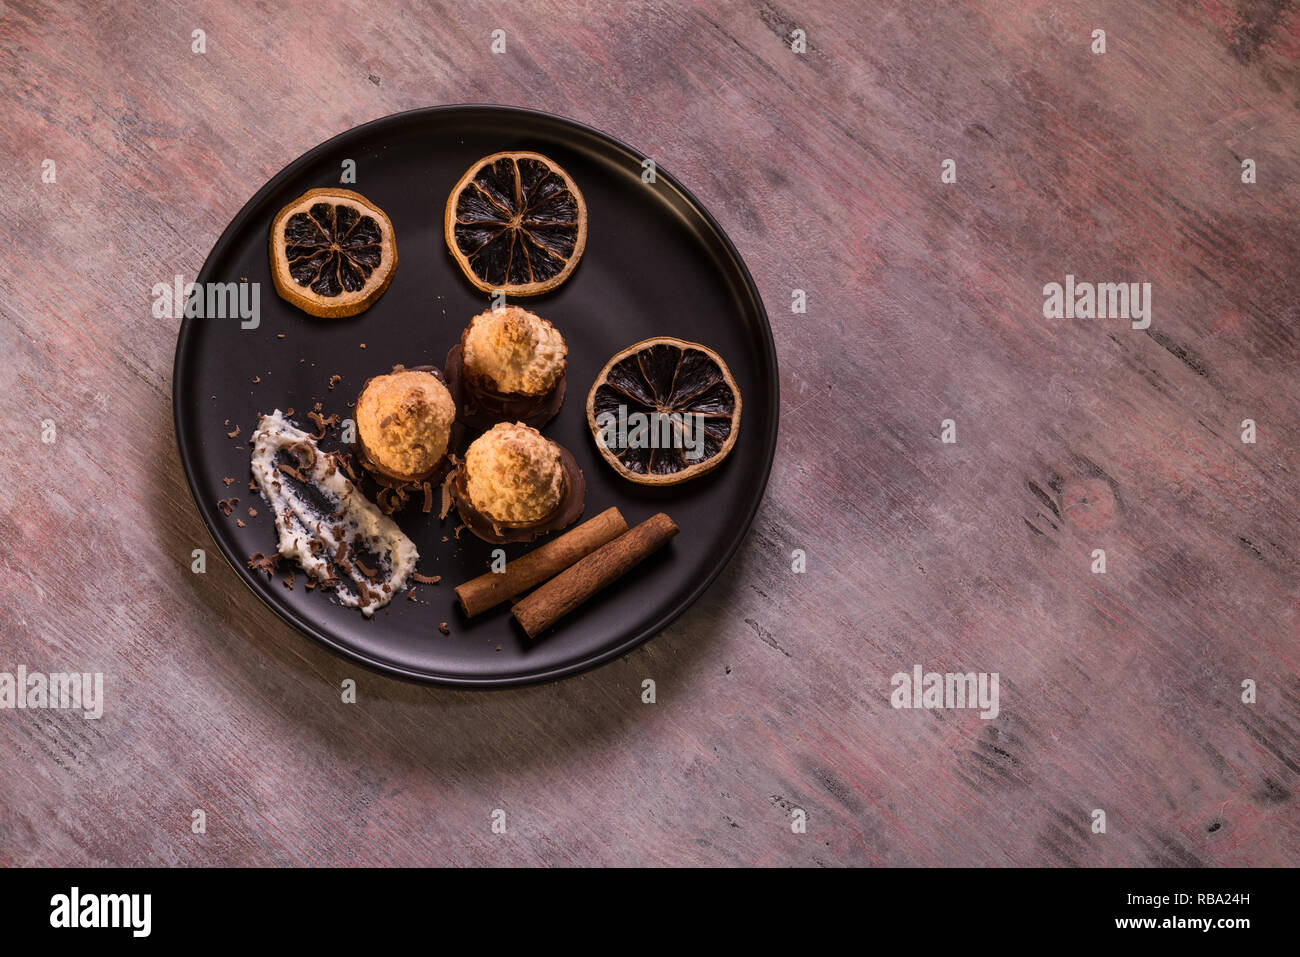 Horizontal photo of few pieces of baked homemade sweets. Confection has nice crust and chocolate on bottom. Few pieces of dry orange rings are around  Stock Photo